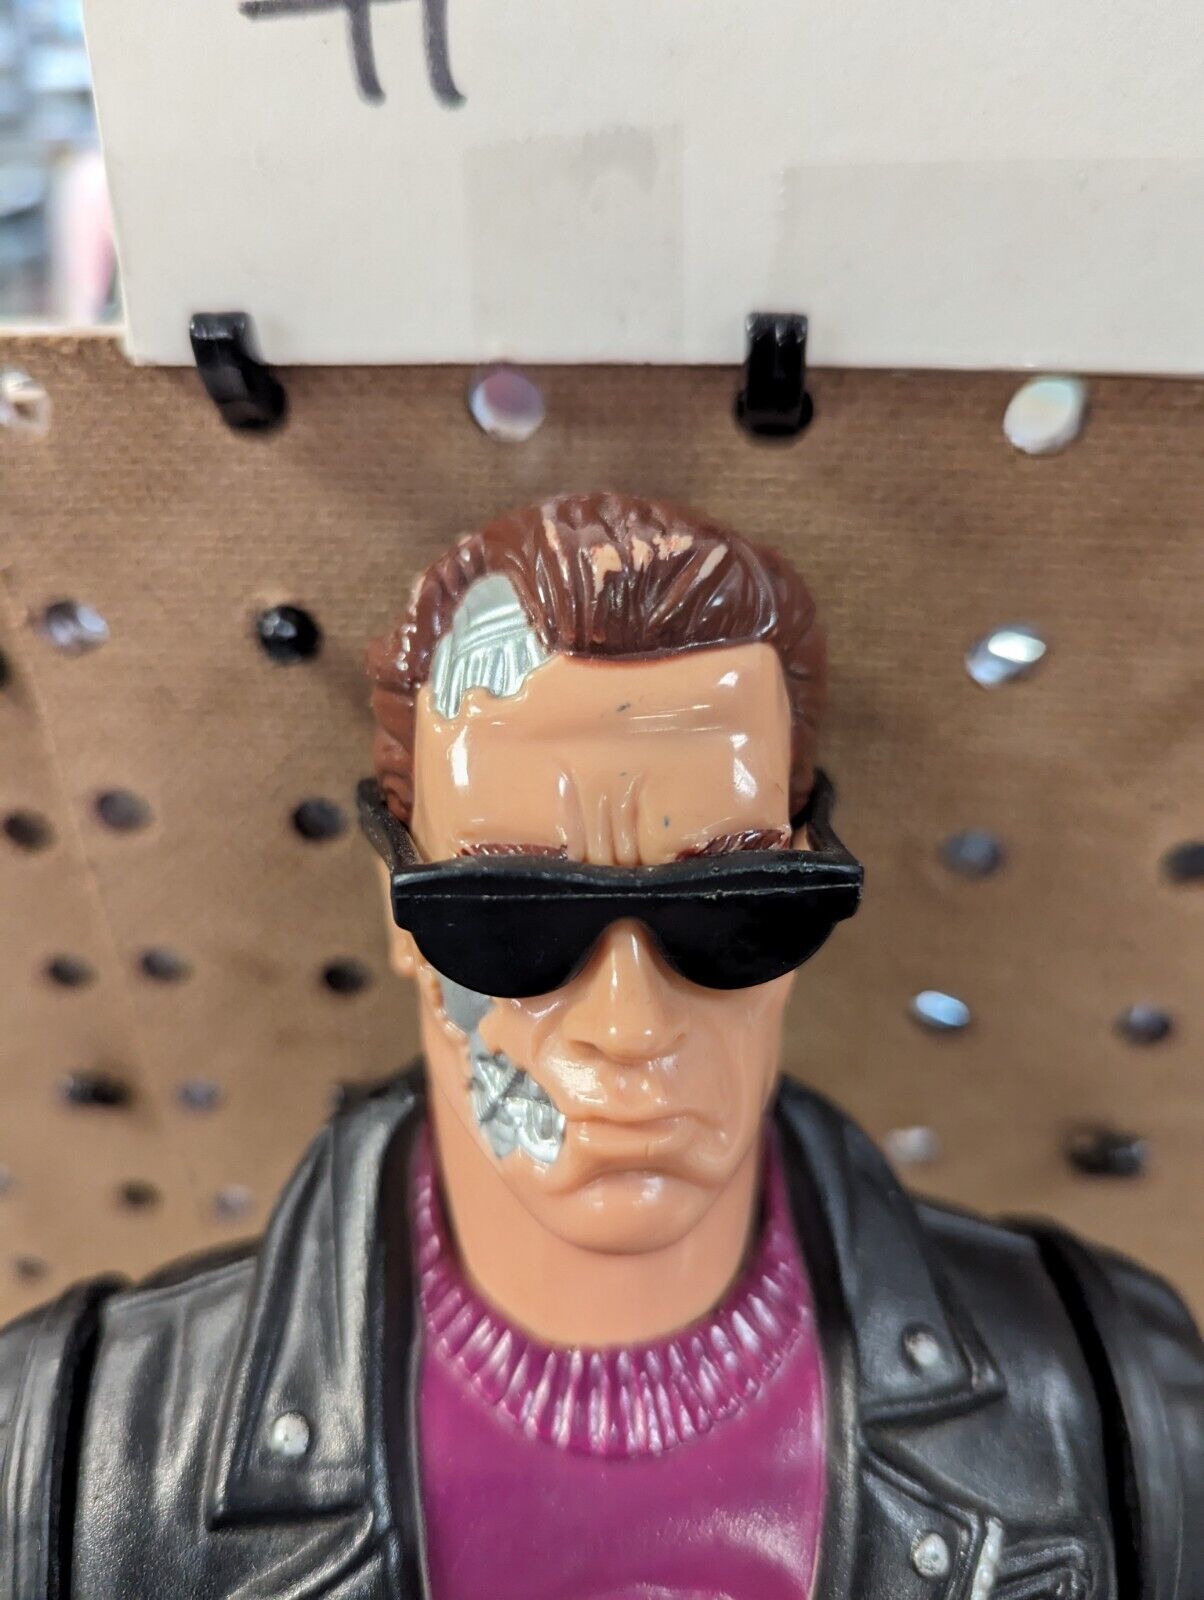 Vintage 1992 Terminator 2 Arnold Talking Figure Tested And Working